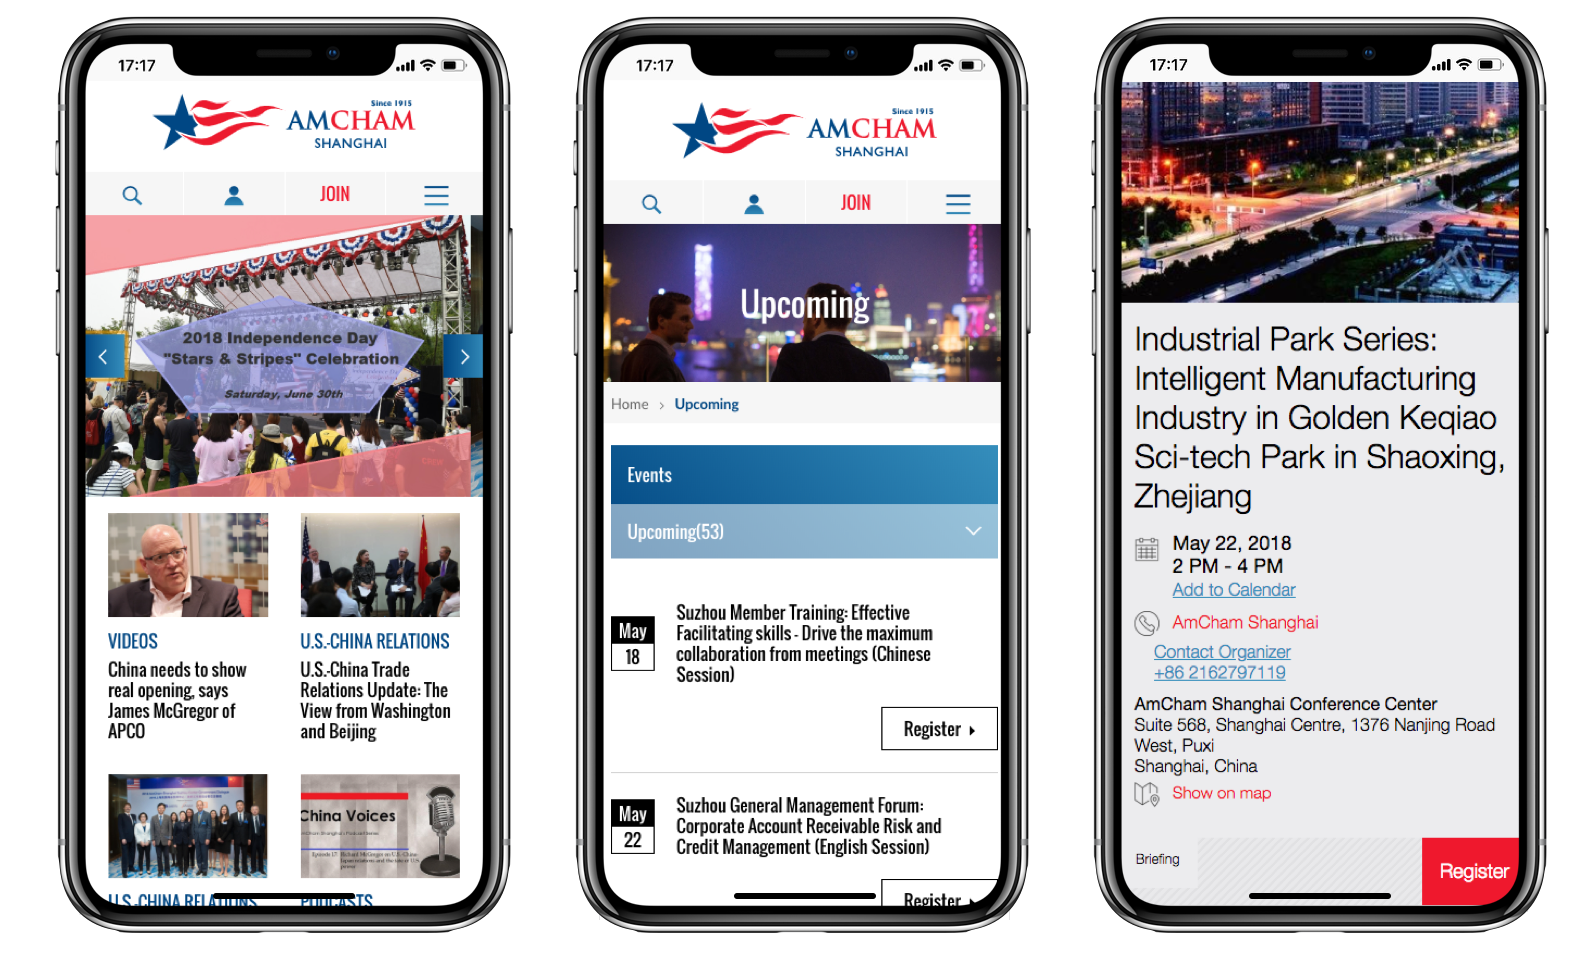 The AmCham website in mobile view